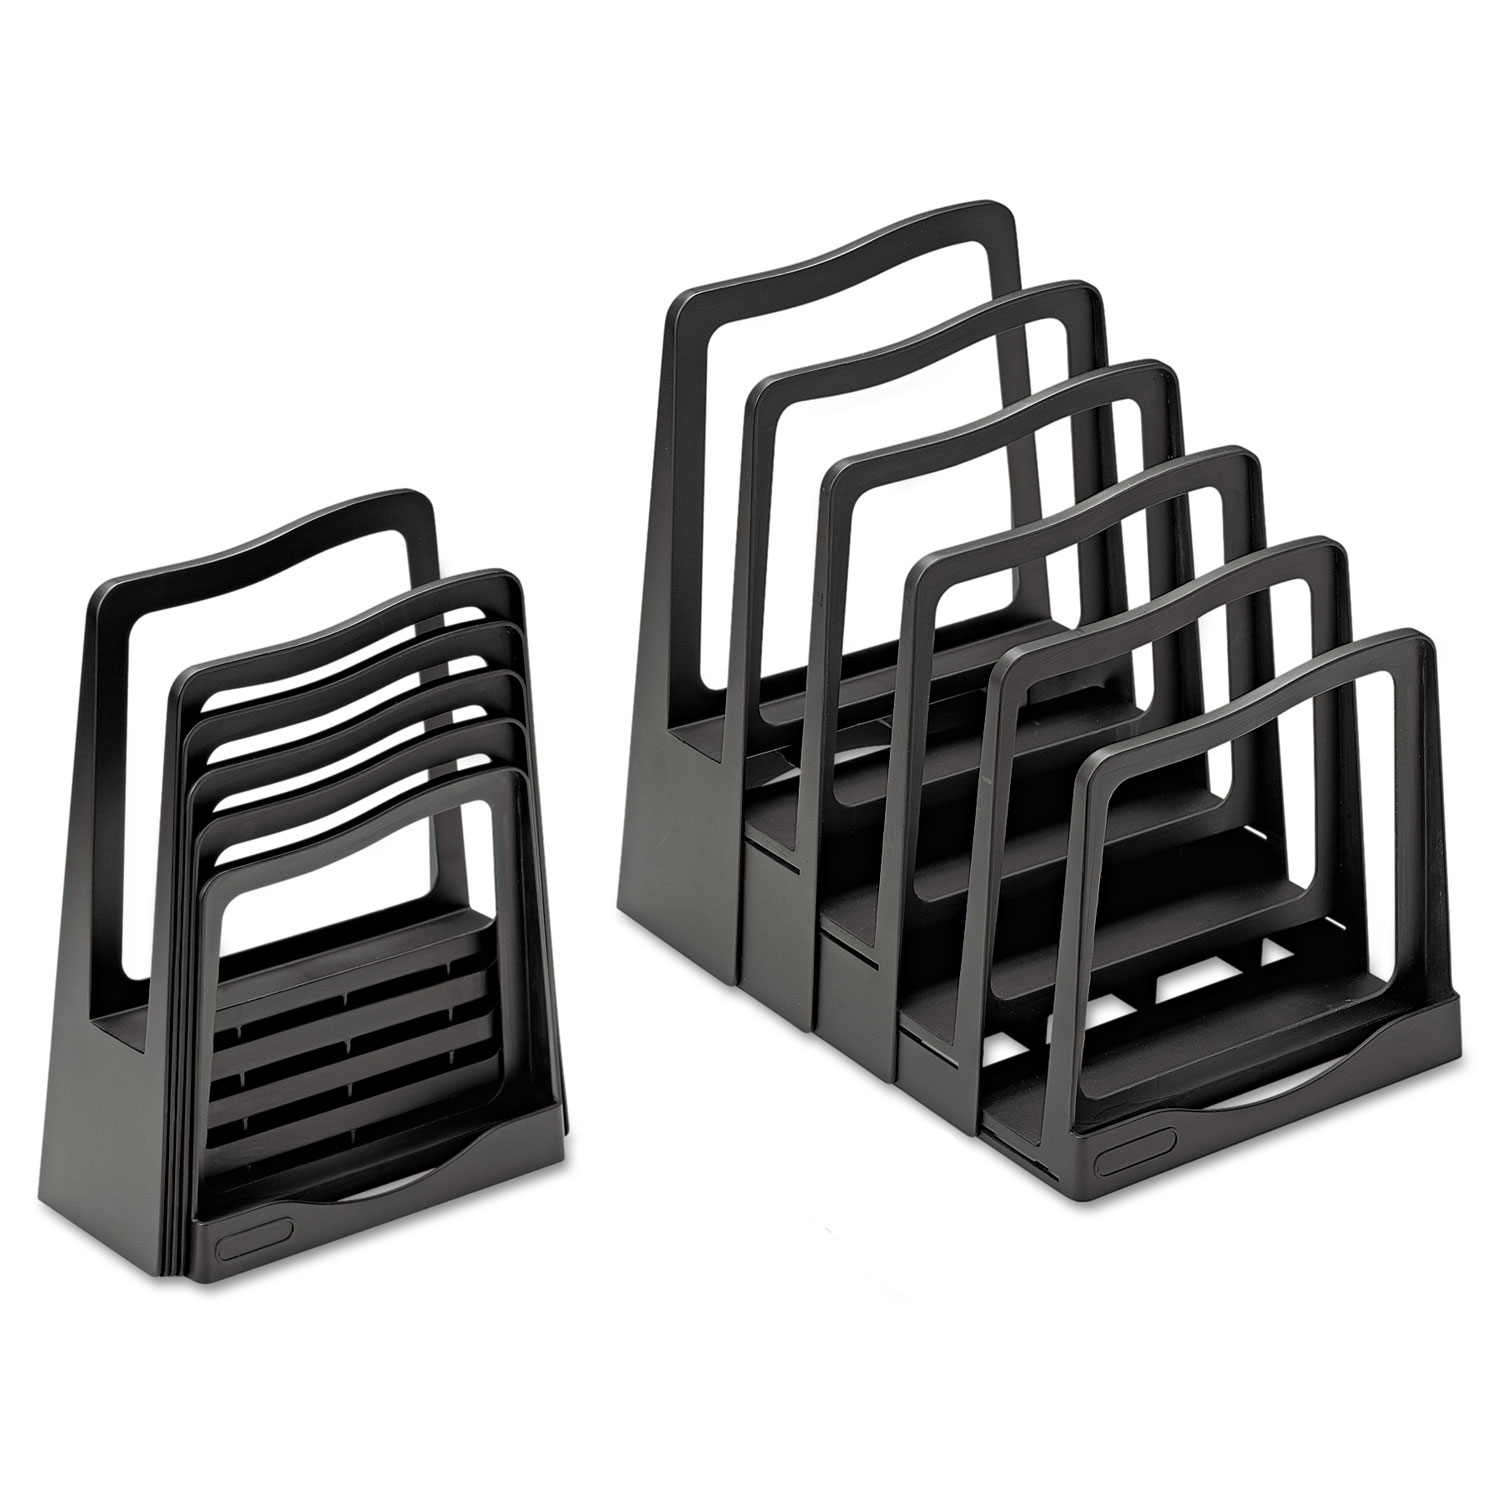  Avery 73523 Adjustable File Rack, 5 Sections, Letter Size Files, 8 x 11.5 x 10.5, Black (AVE73523) 